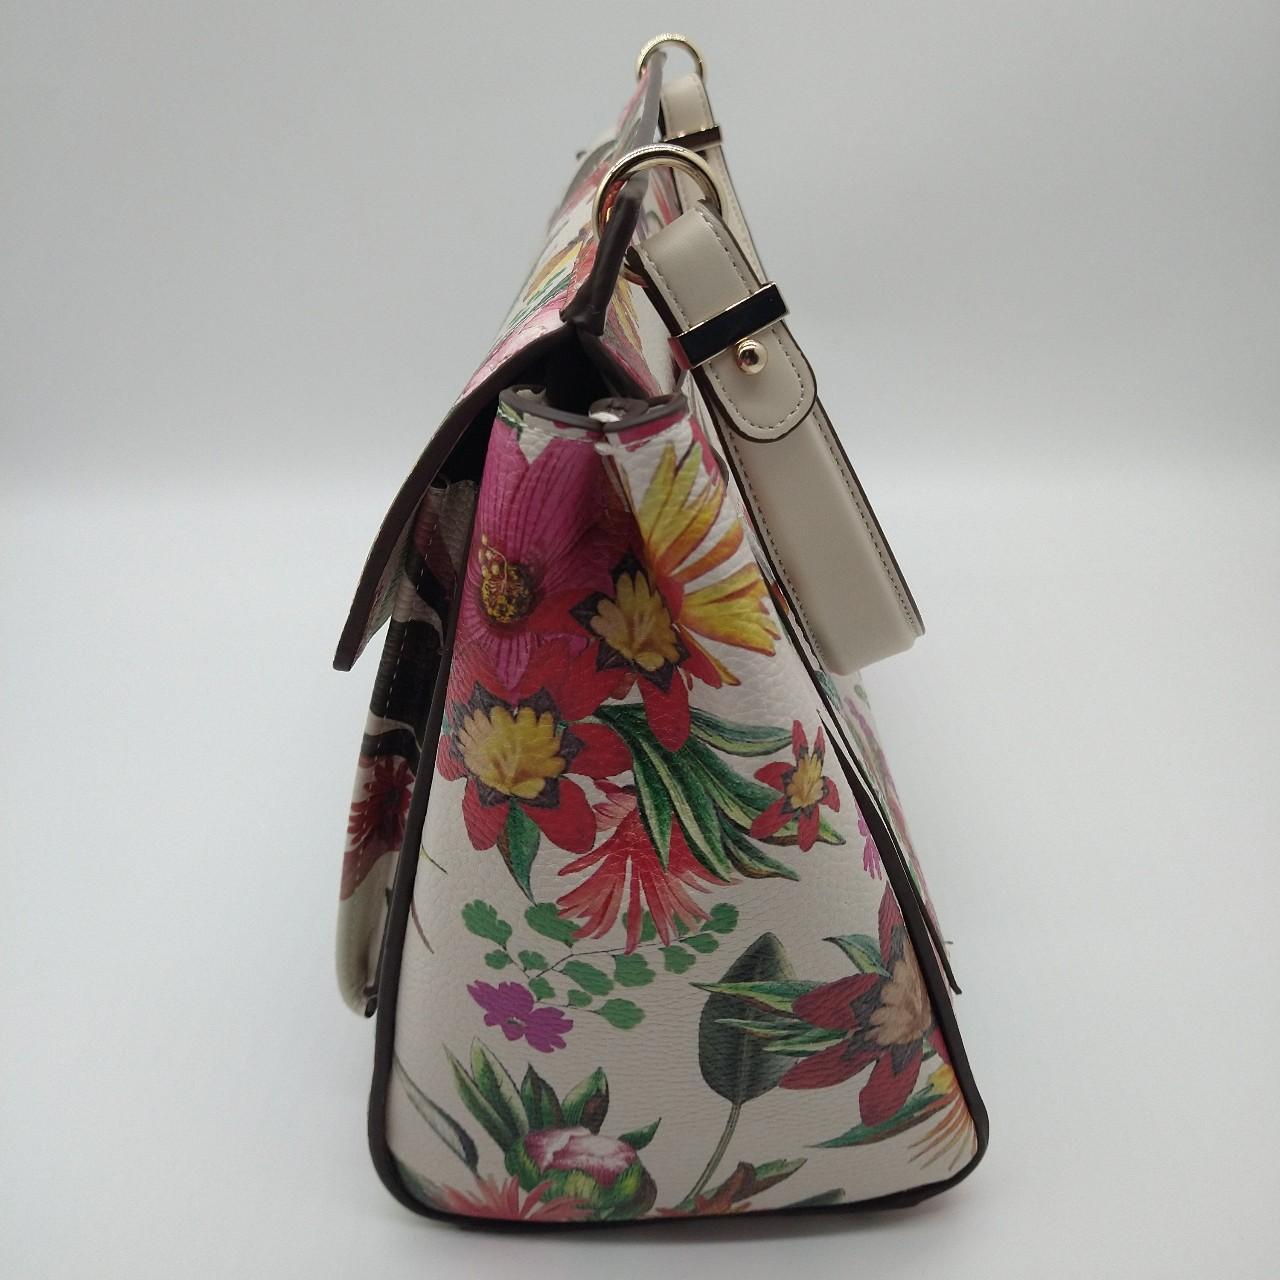 Product Image 2 - Fiorelli Flynn floral satchel in